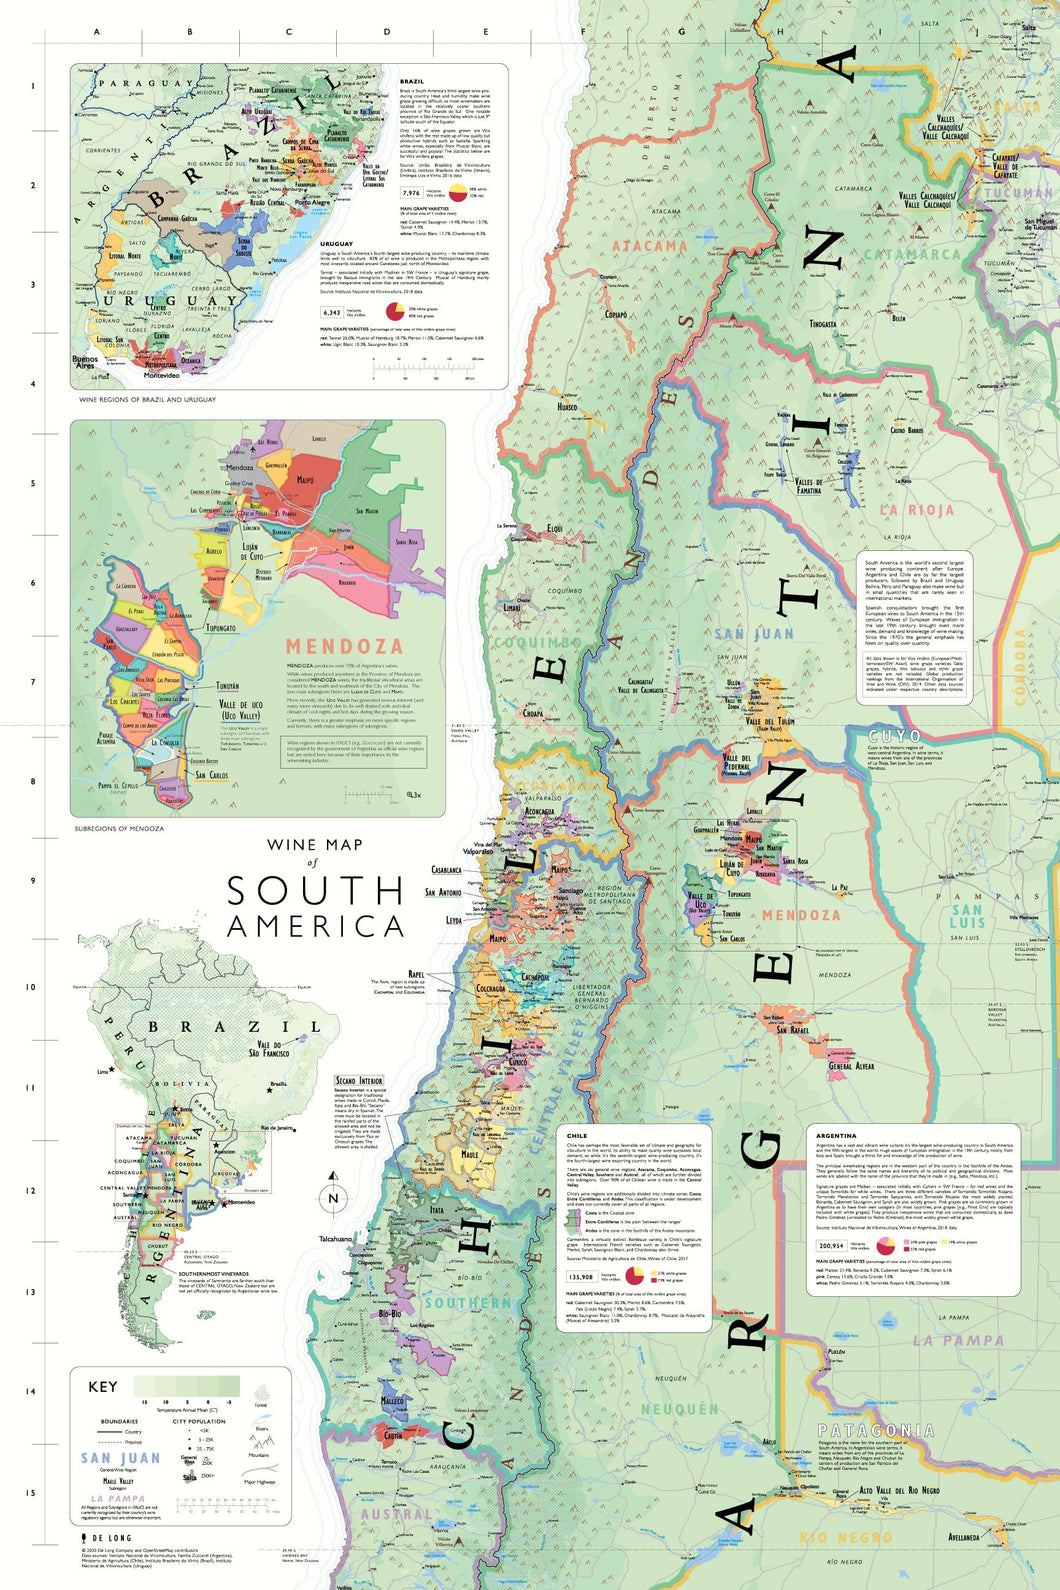 Wine map of South America